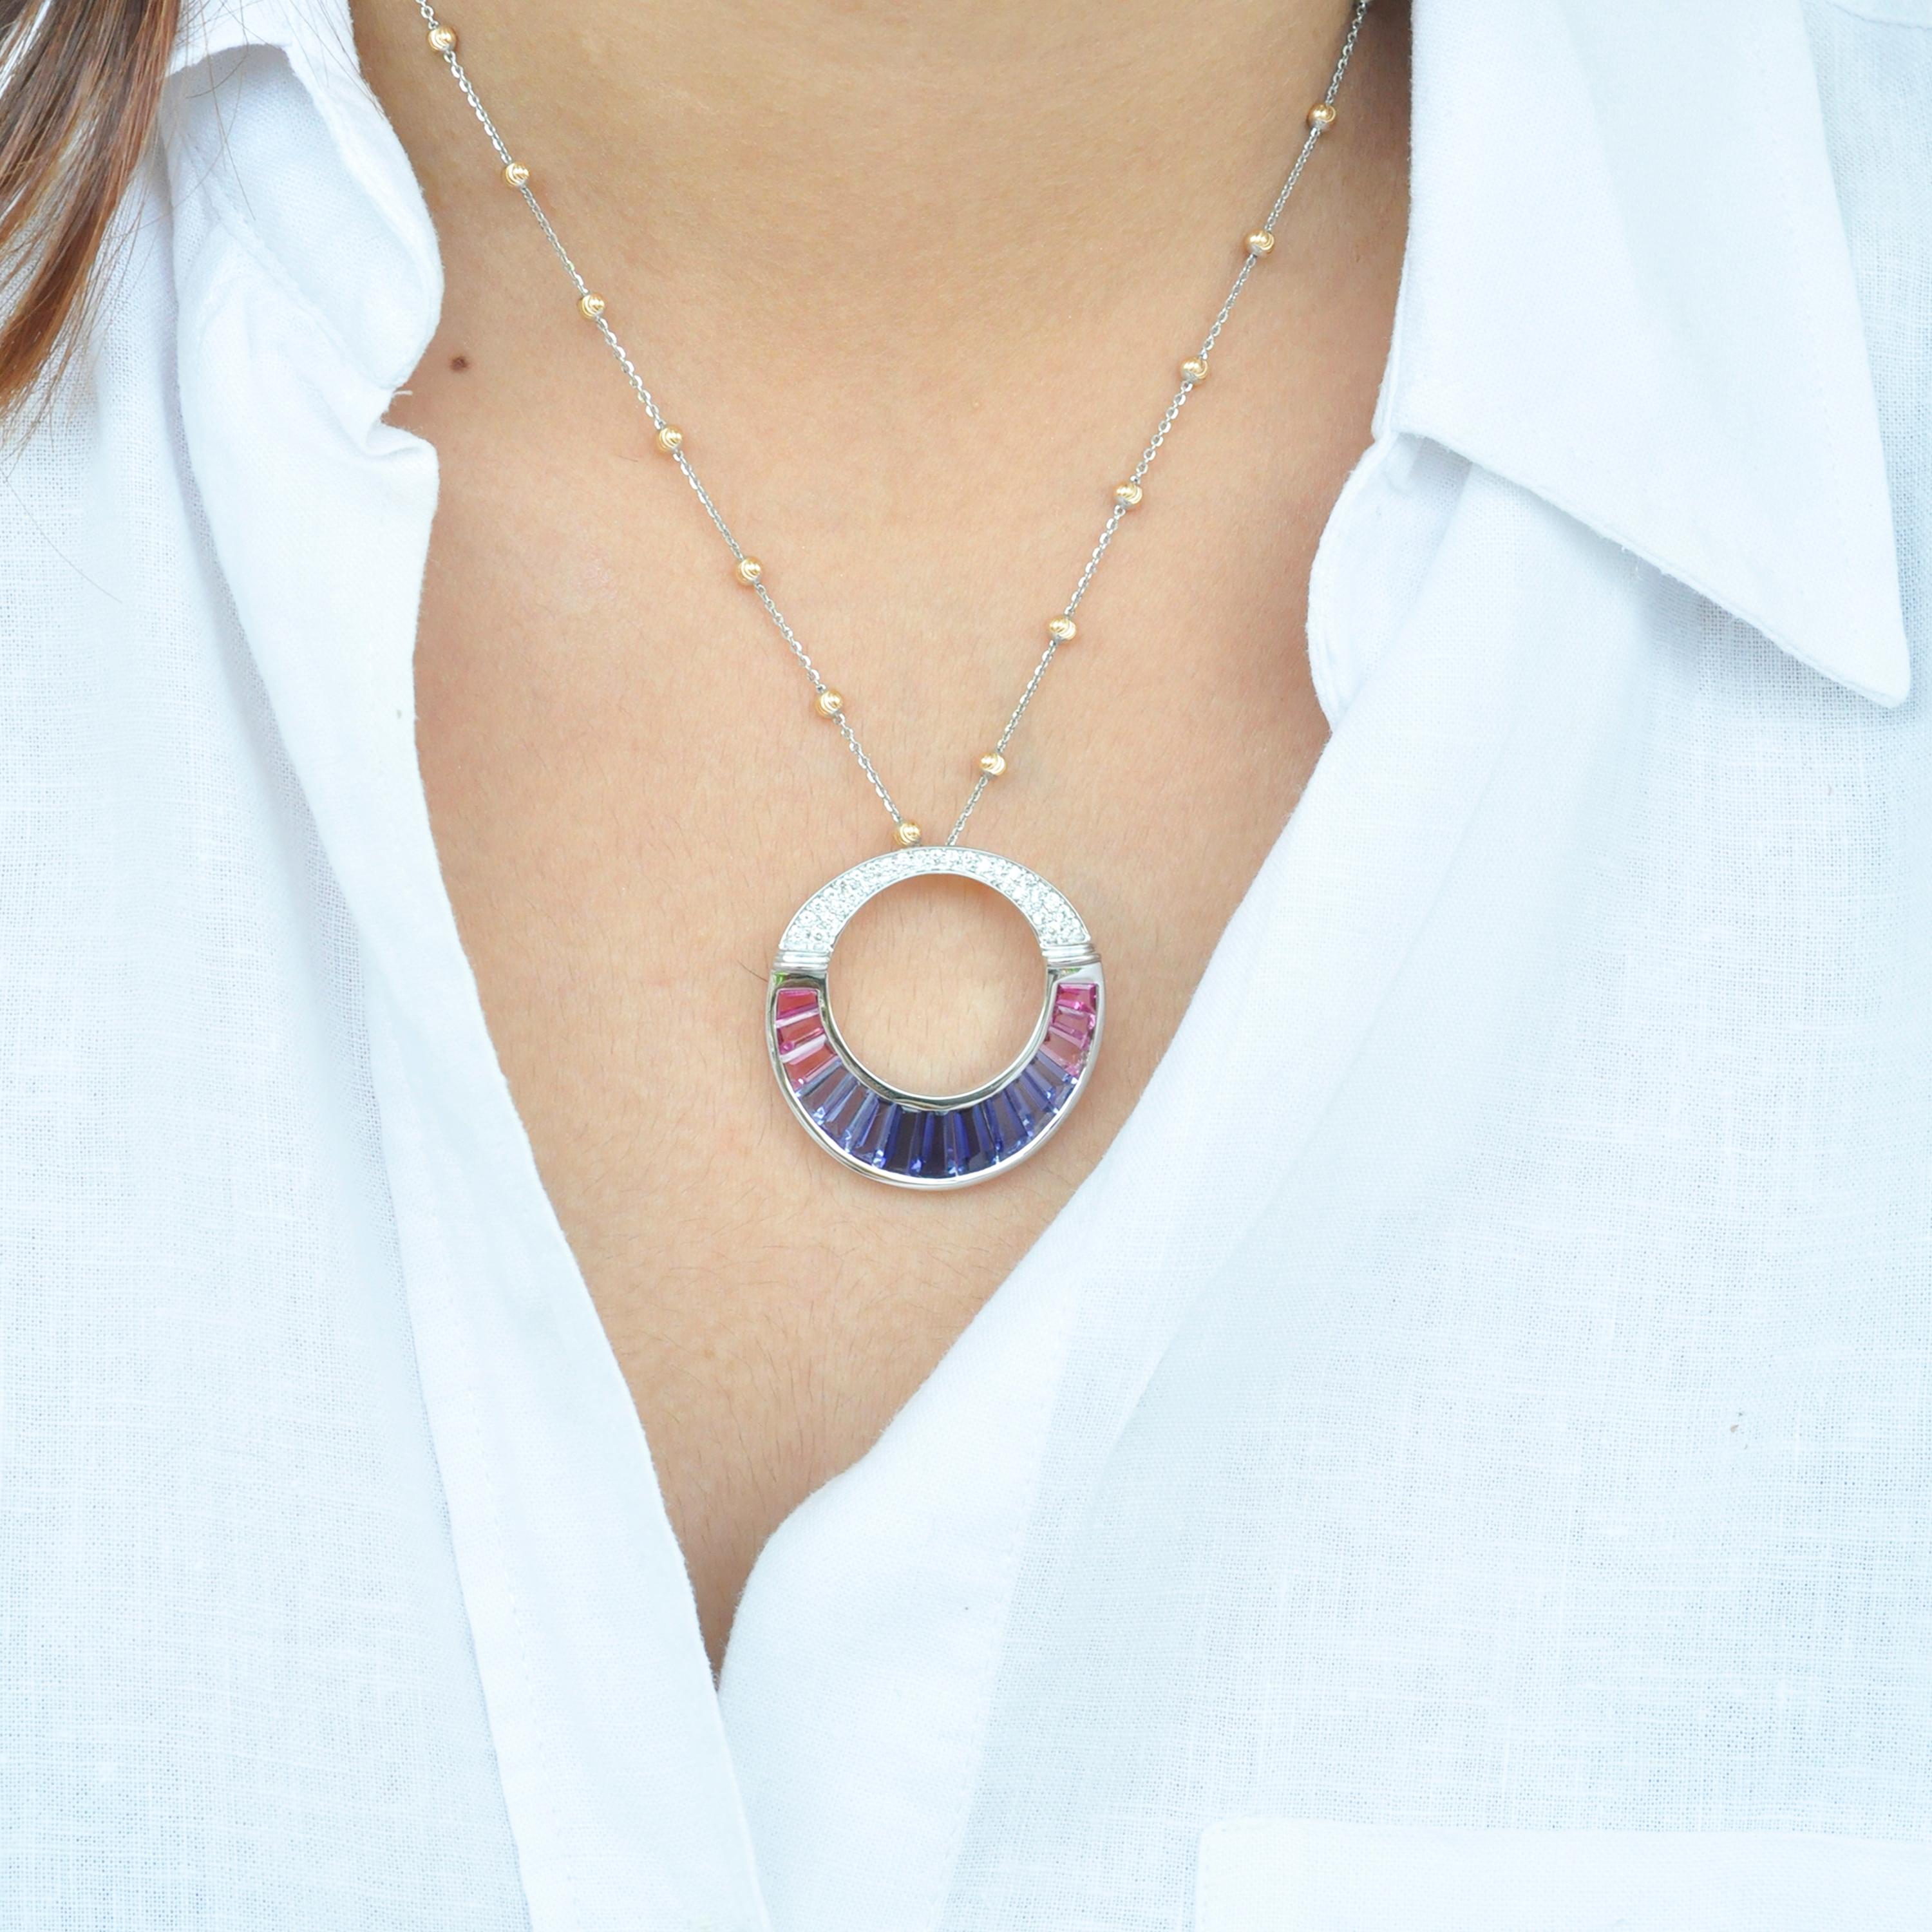 This 18 karat white gold iolite pink tourmaline baguette diamond circular pendant / brooch is inspired by the necklace worn by cleopatra in the egyptian era, giving it a contemporary make-over. The serene and pleasant shades of iolite and pink